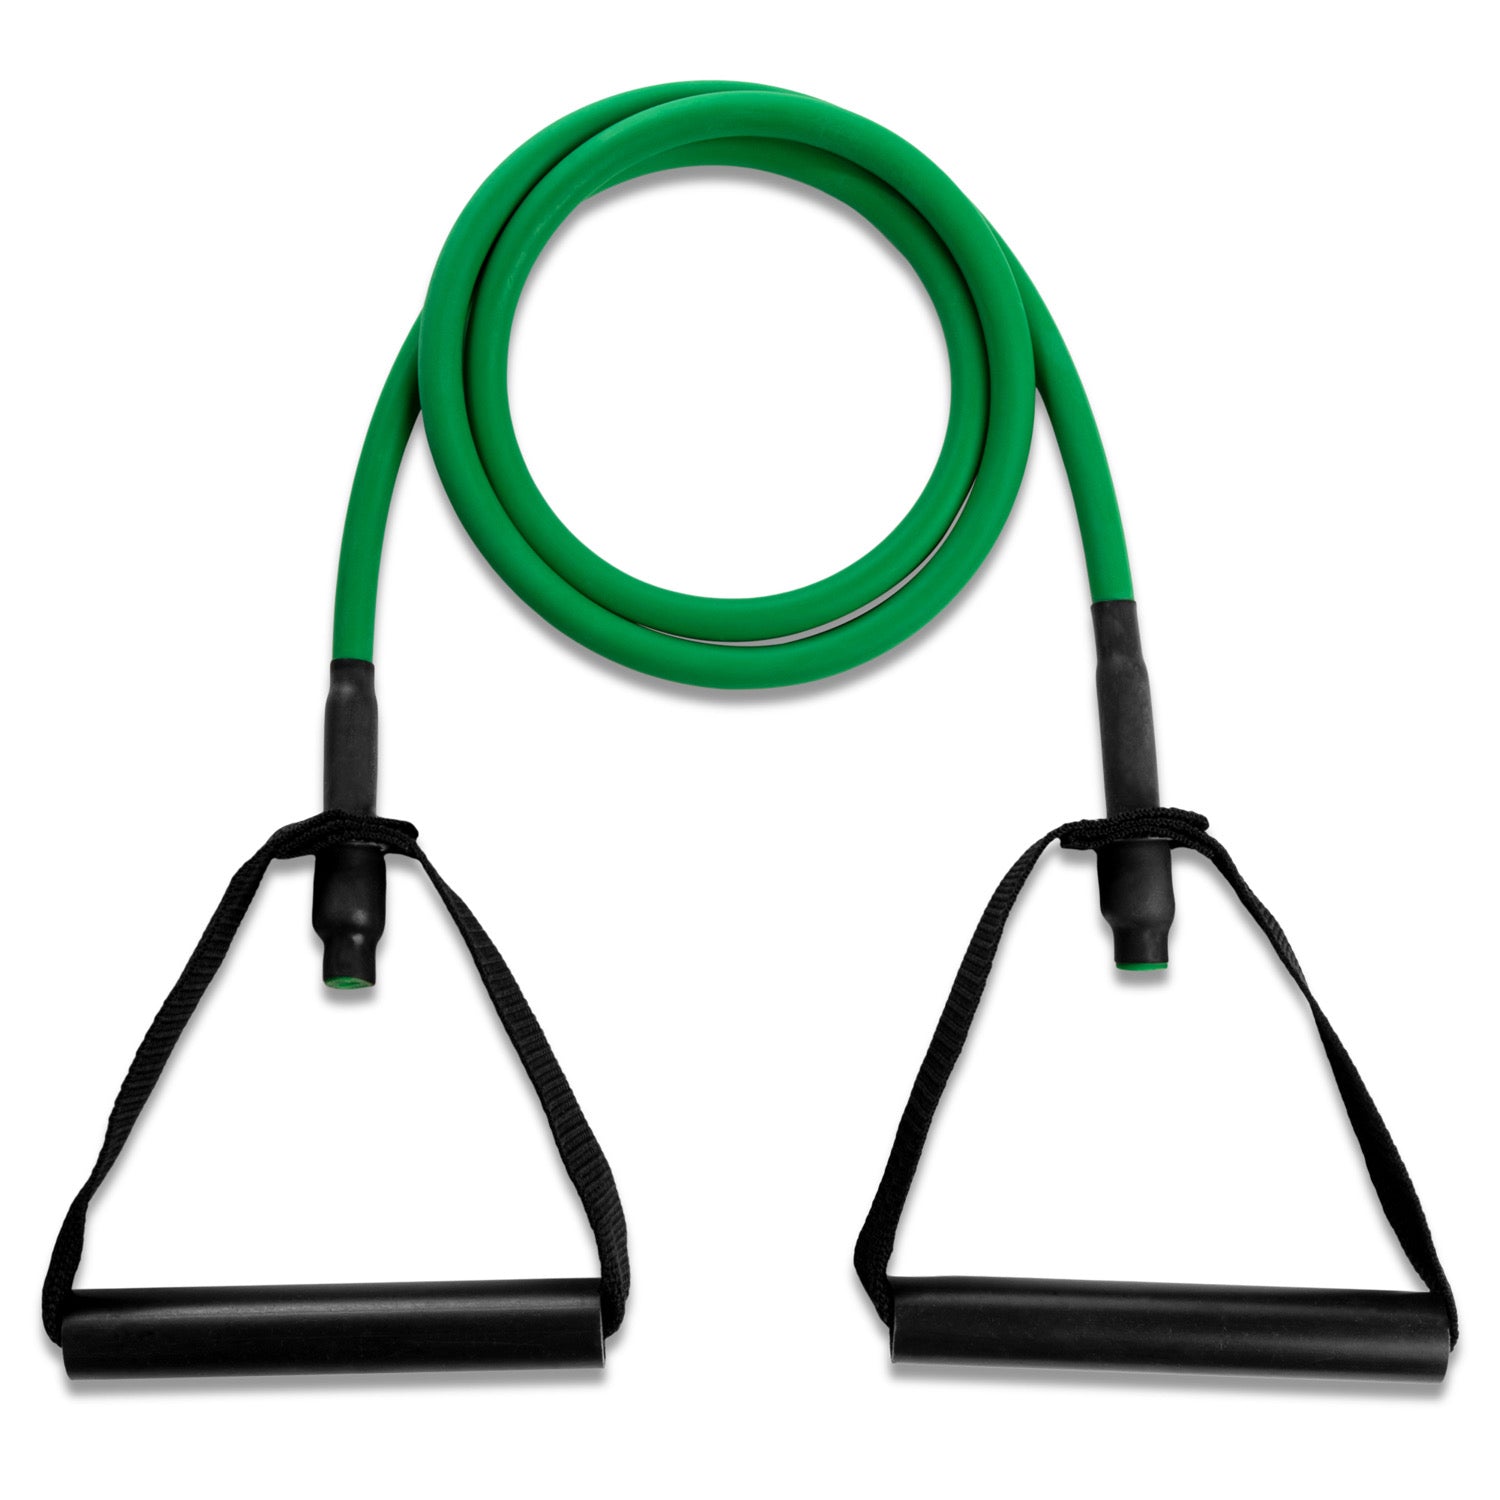 XP Resistance Tubing with PVC Handles Series Light / Green RHINO Fitness __label:NEW! fitness physical therapy resistance Training tubing